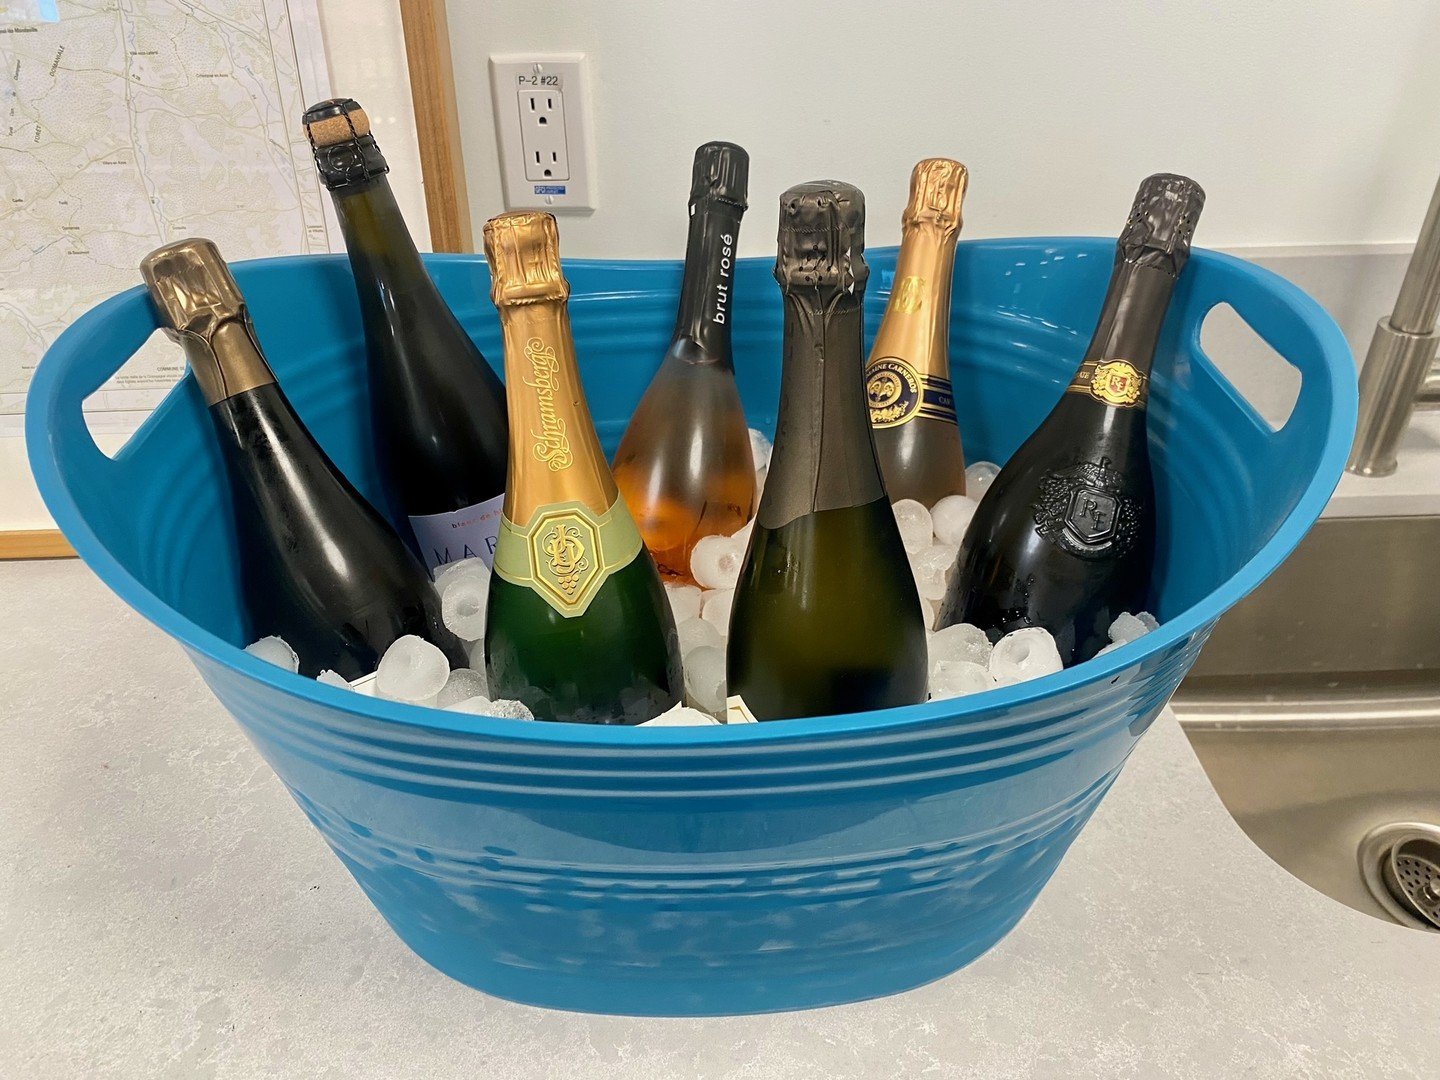 Thanks to all who came out on Saturday to toast moms with our California bubbly tasting lineup! We hope that every one who does the hard work of mothering got to relax with a glass of something delicious on Sunday&mdash;especially Kay &amp; Linda, ou